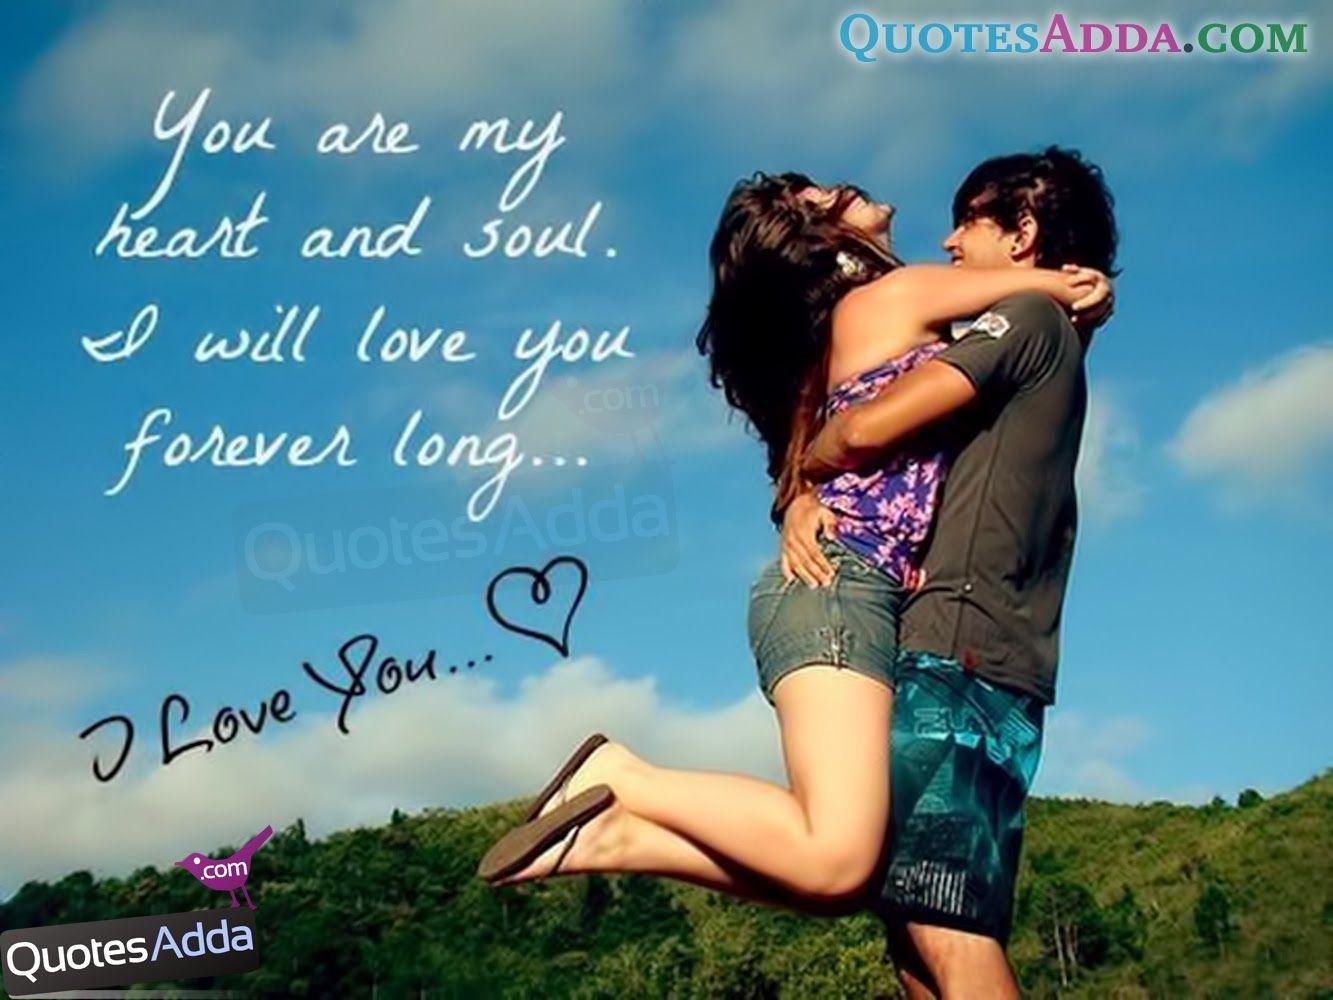 love quotes english Best Love Quotations in English Lovers